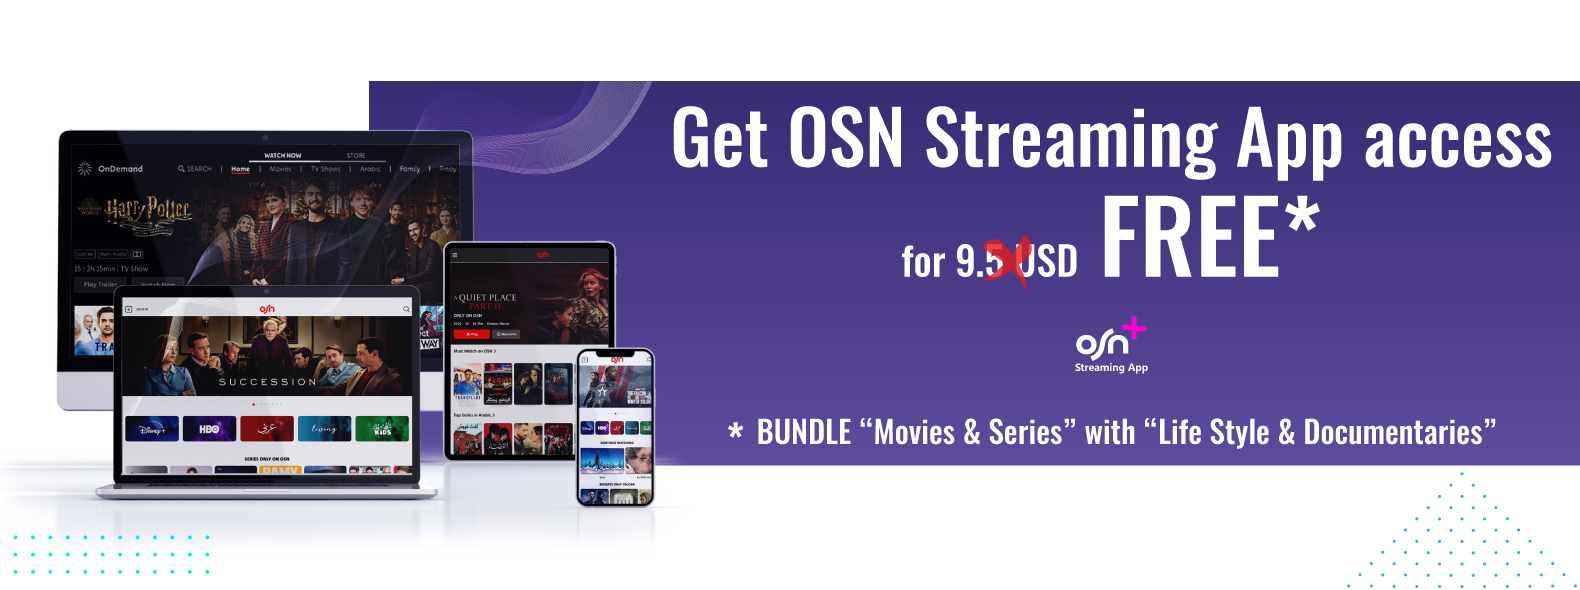 https://www.cablevision.com.lb/osn_streaming